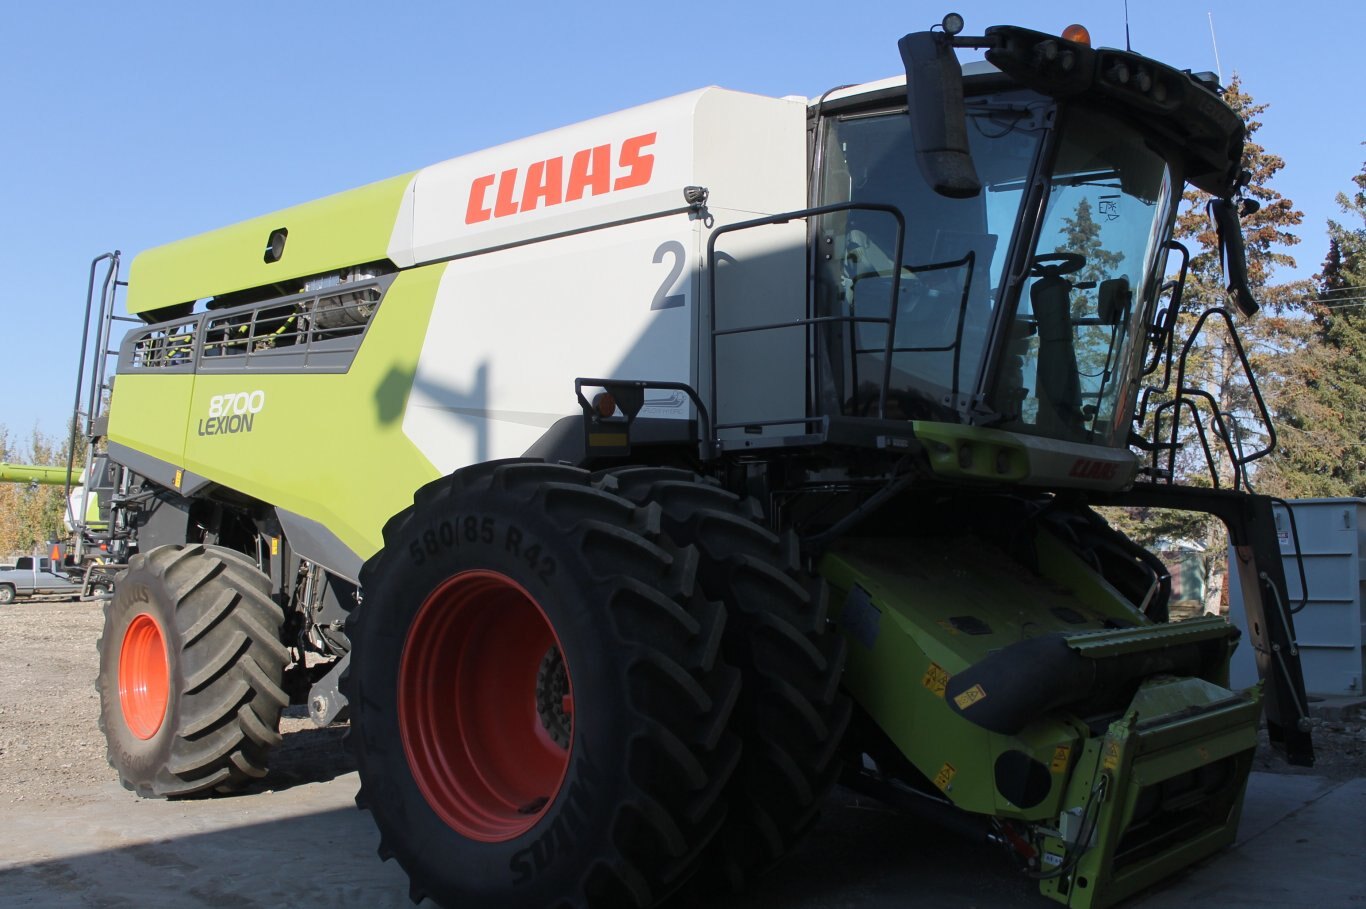 2022 CLAAS LEXION 8700, 101 Hrs, 2023 Year Updates, Loaded